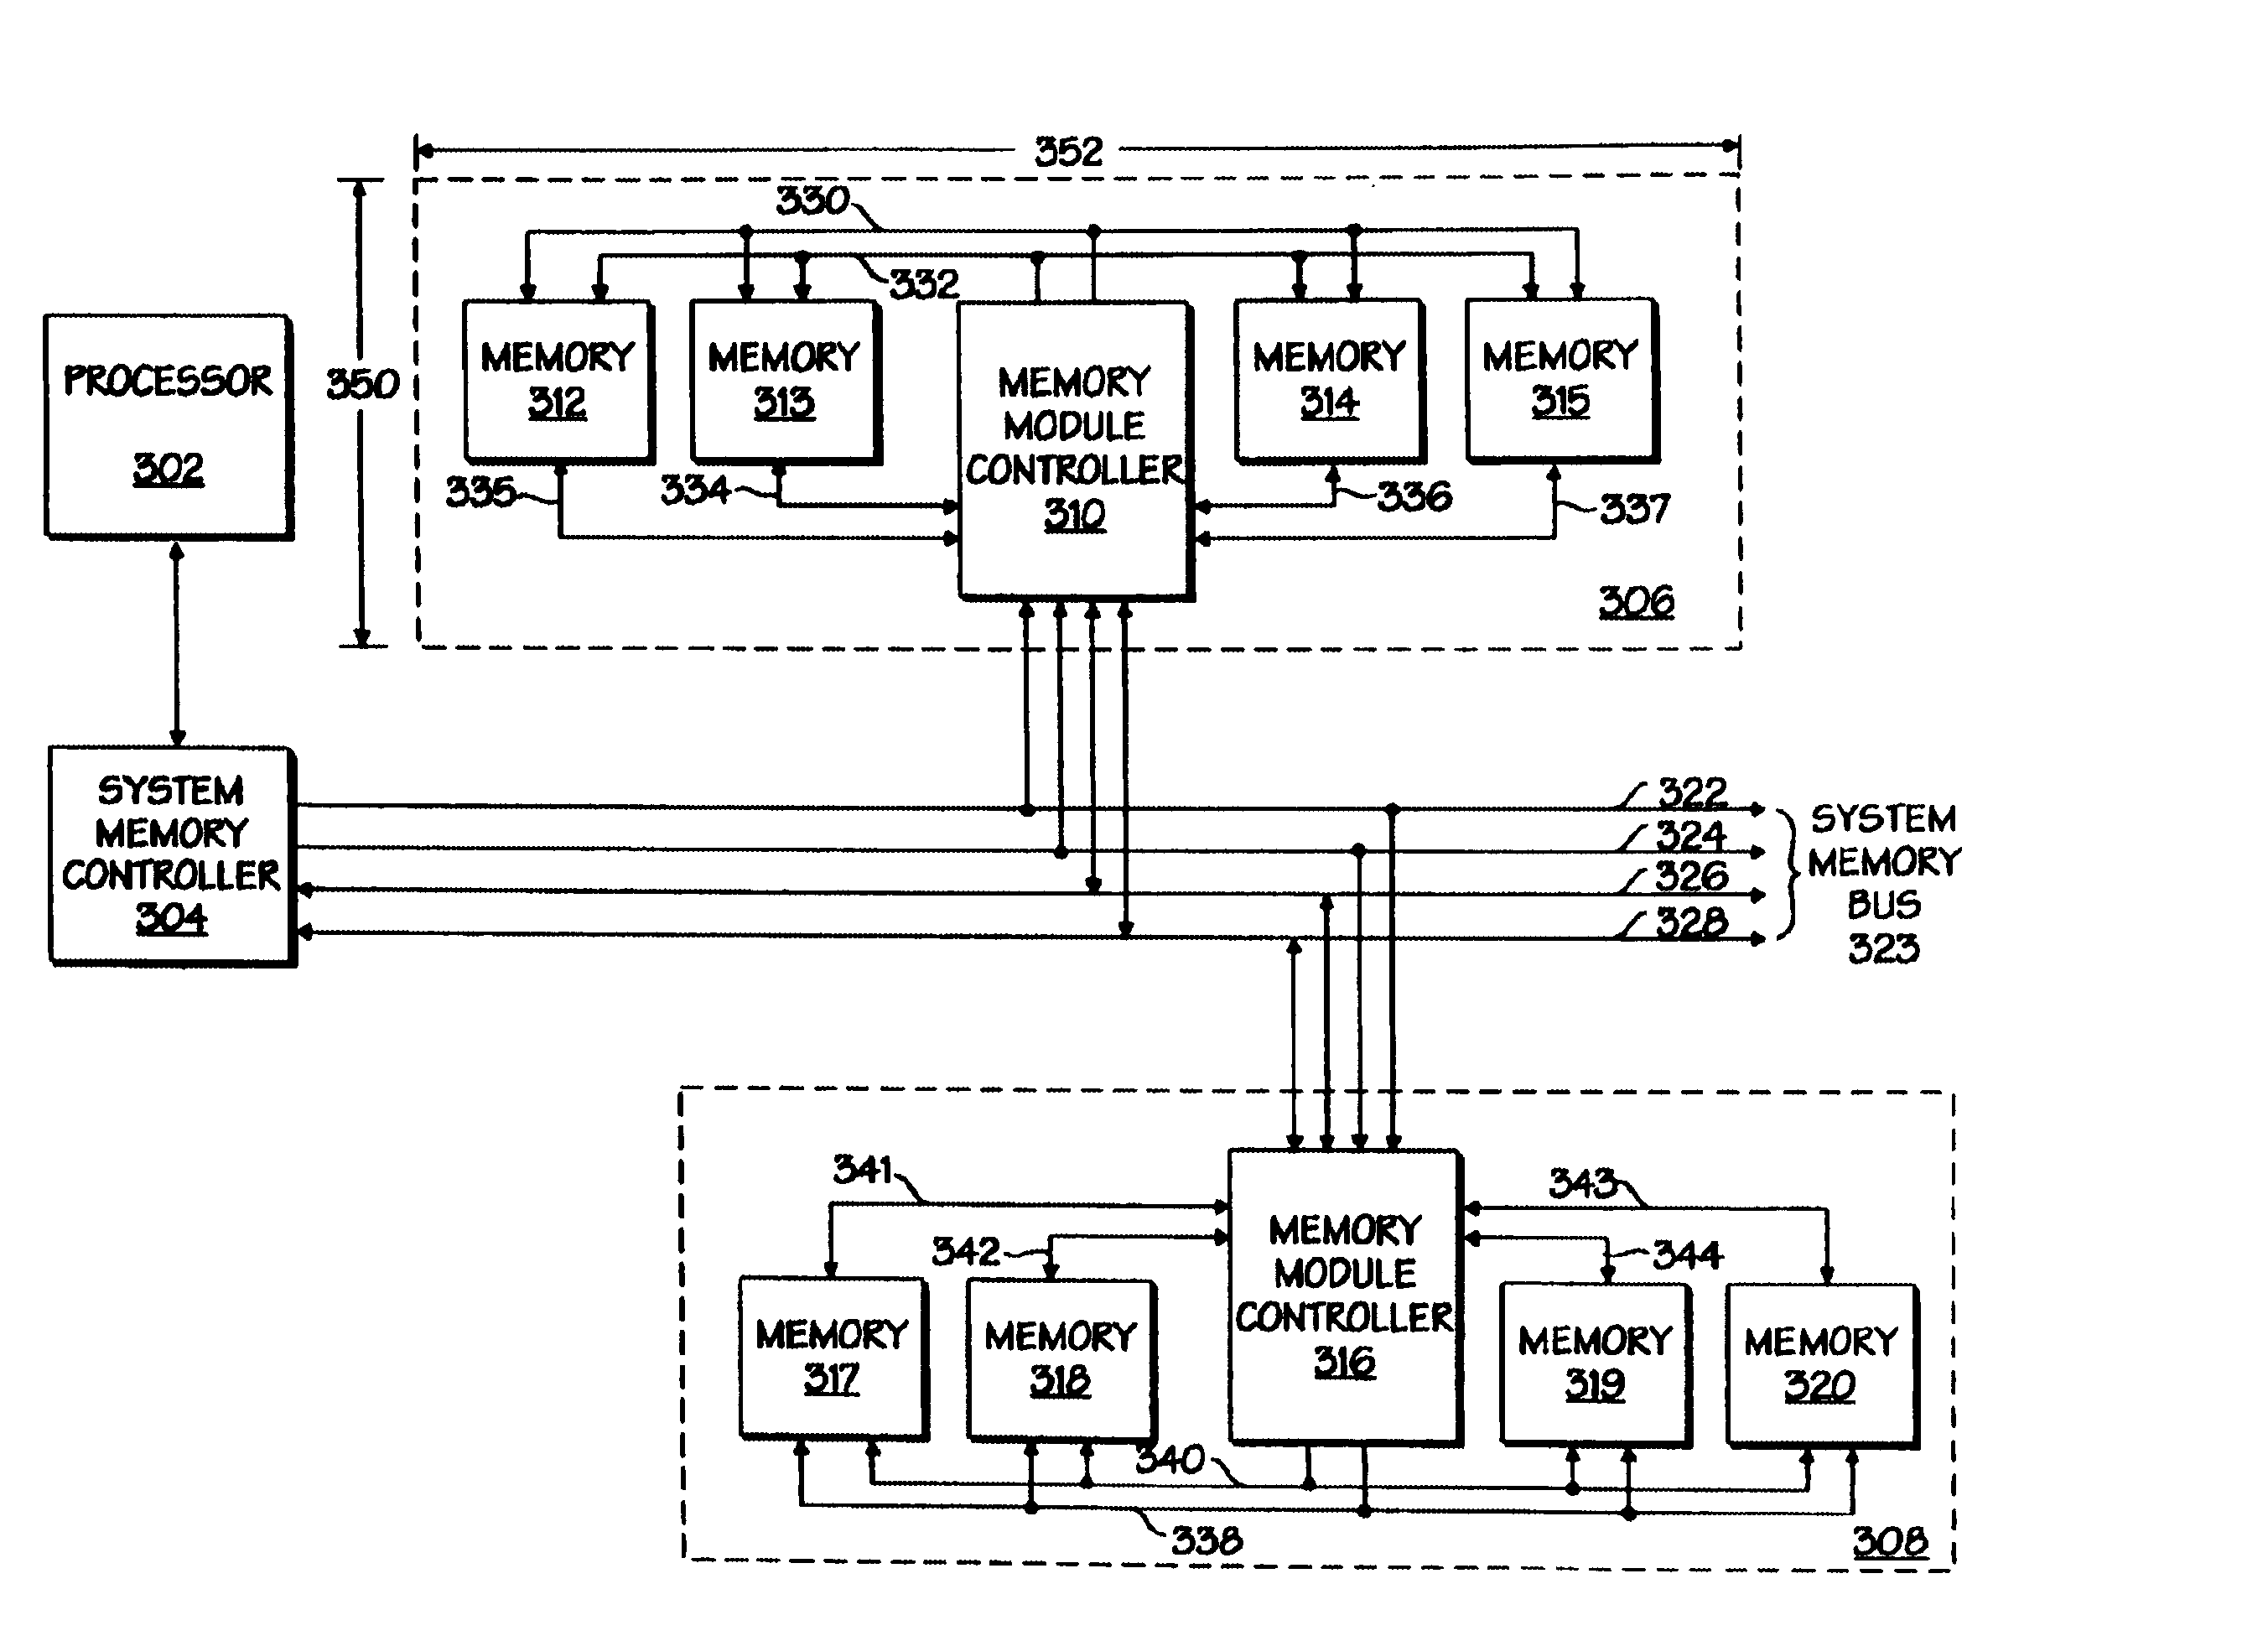 Memory module controller for providing an interface between a system memory controller and a plurality of memory devices on a memory module